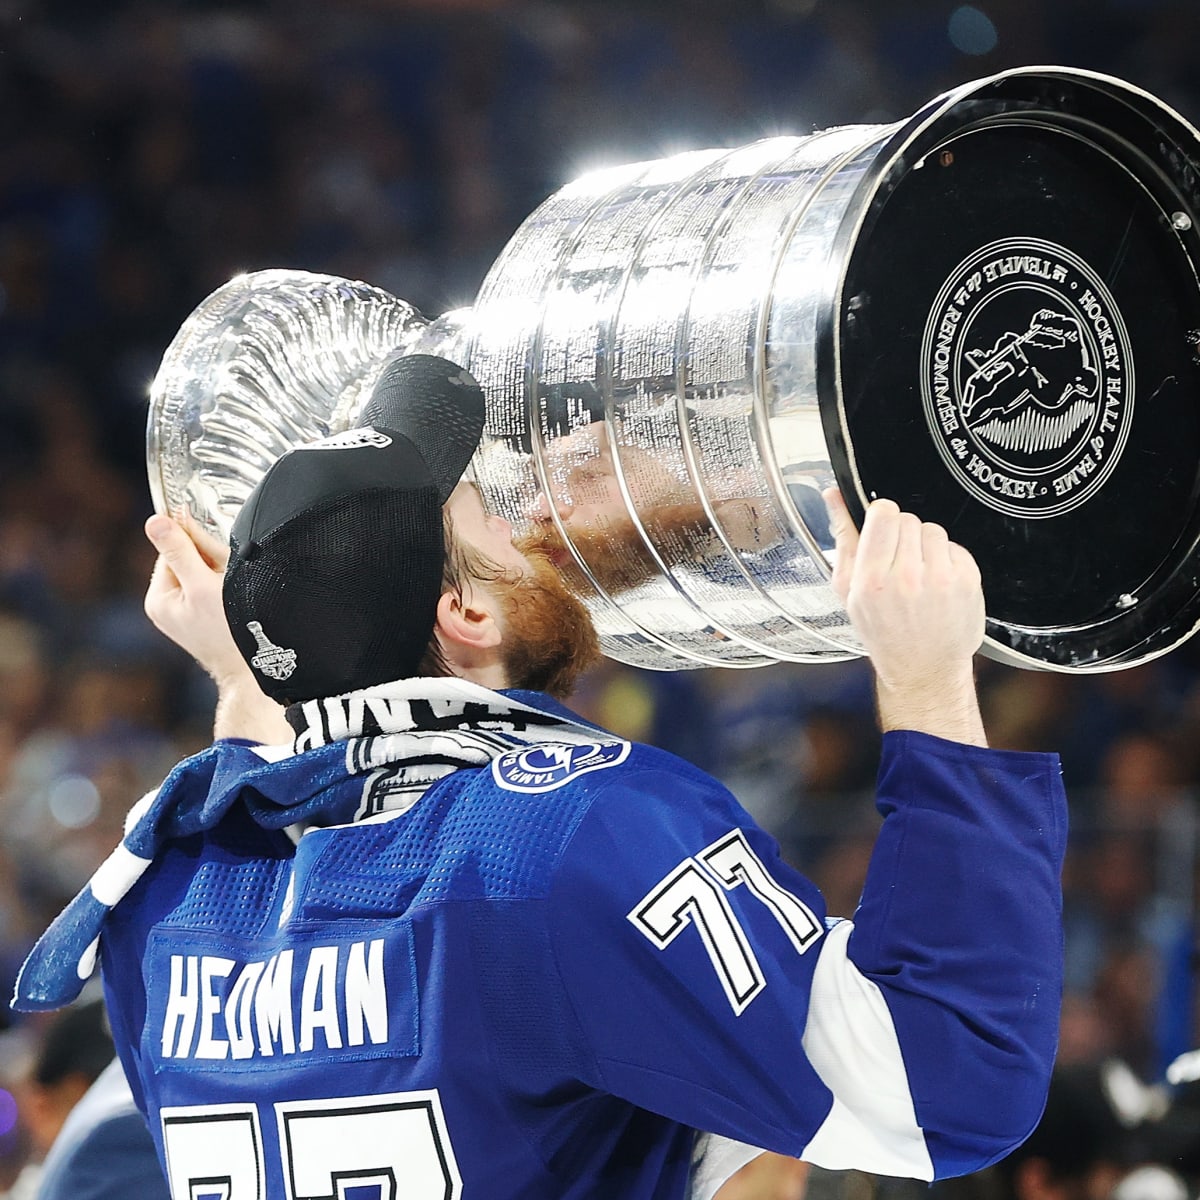 Tampa Bay Lightning 2023 Offseason: Can They Afford To Keep